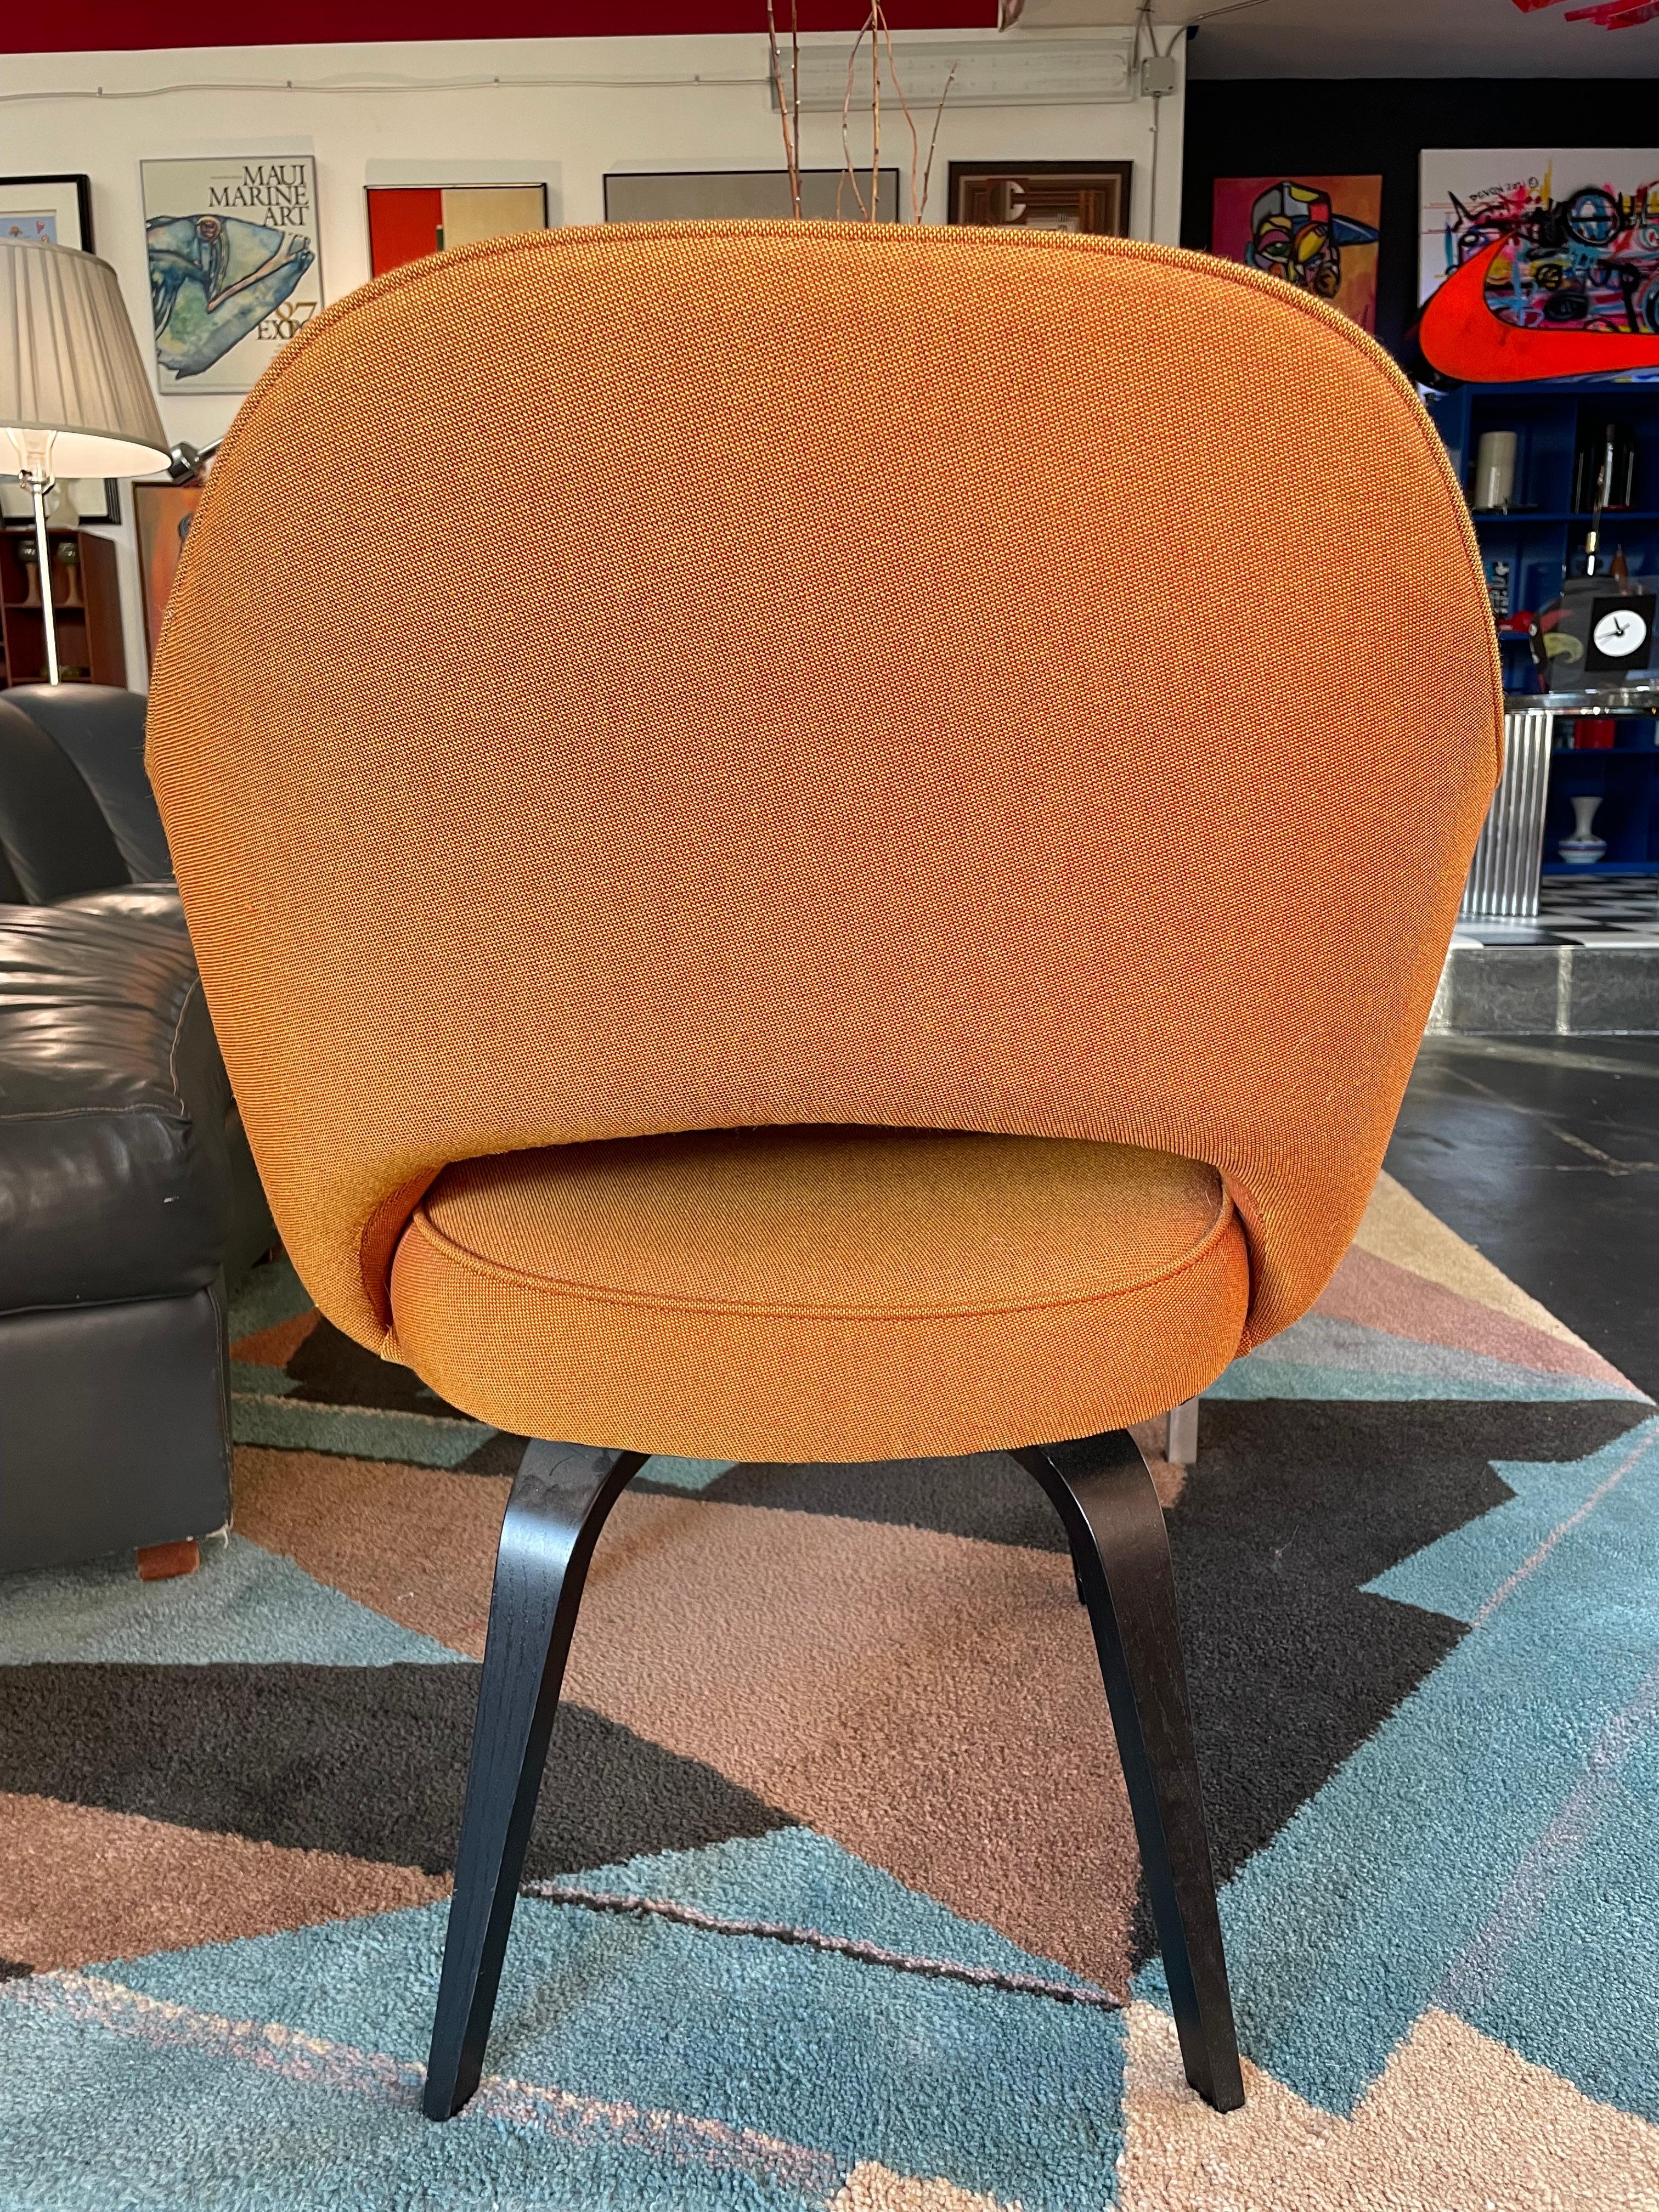 Mid-20th Century Saarinen for Knoll Executive Chairs, a Pair For Sale